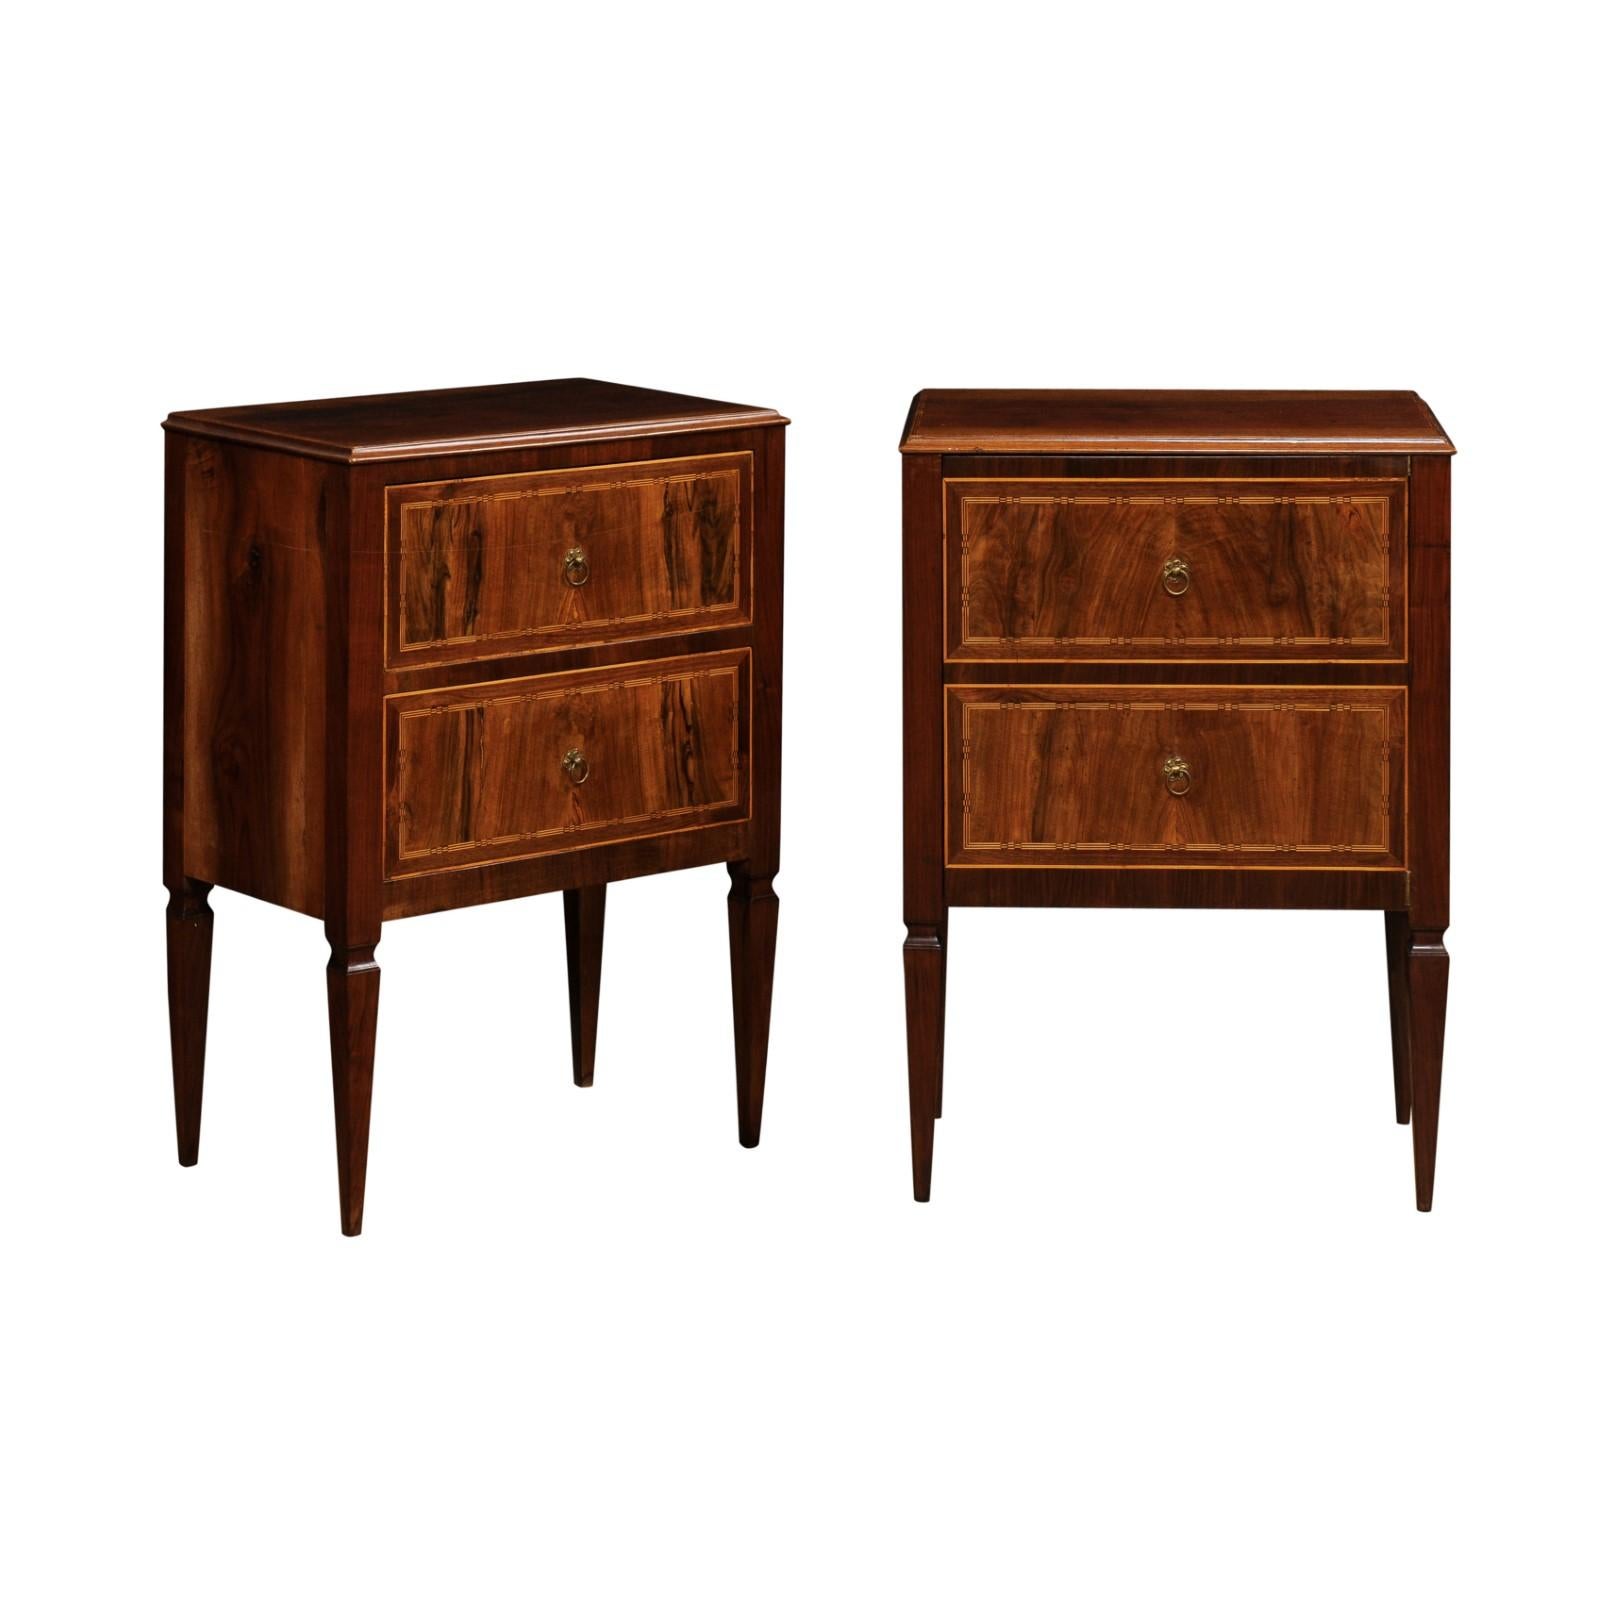 A pair of Italian Neoclassical period walnut and mahogany bedside tables from the late 18th century with two drawers each, butterfly veneer, cross banding and tapered legs. This pair of late 18th-century Italian Neoclassical period bedside tables is